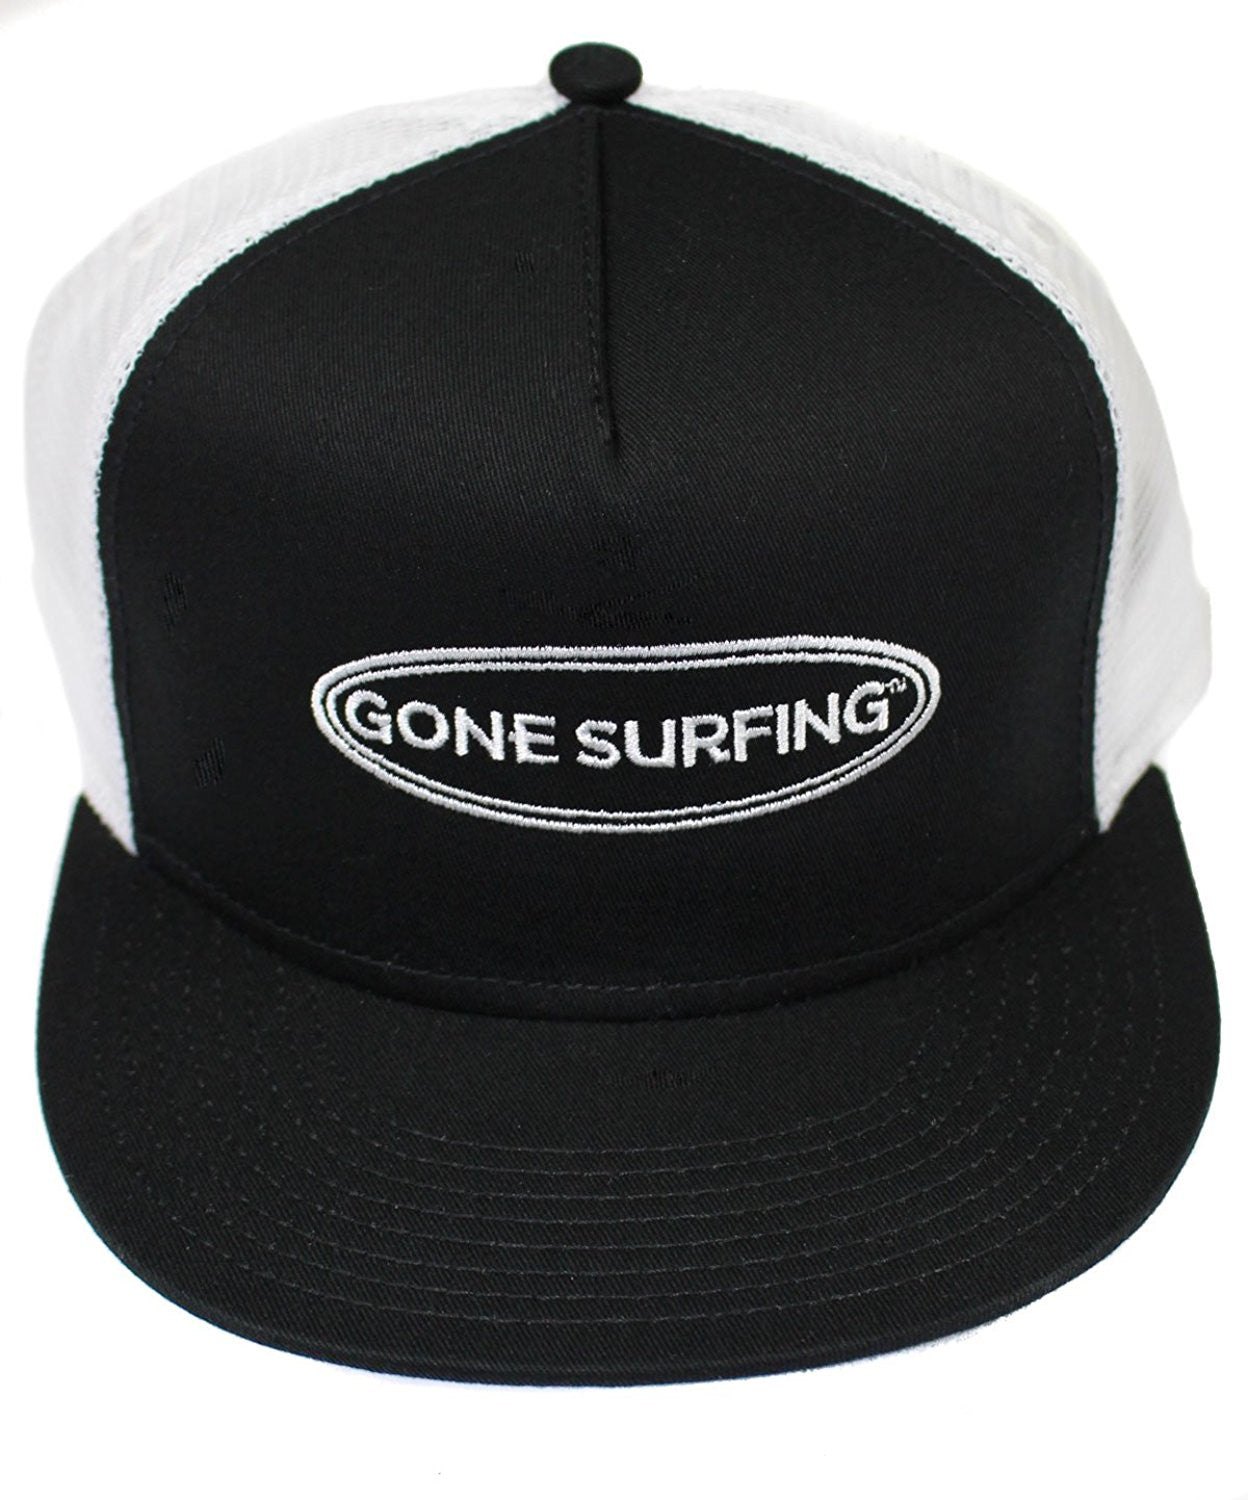 trucker hat with logo Gone Surfing for surfer